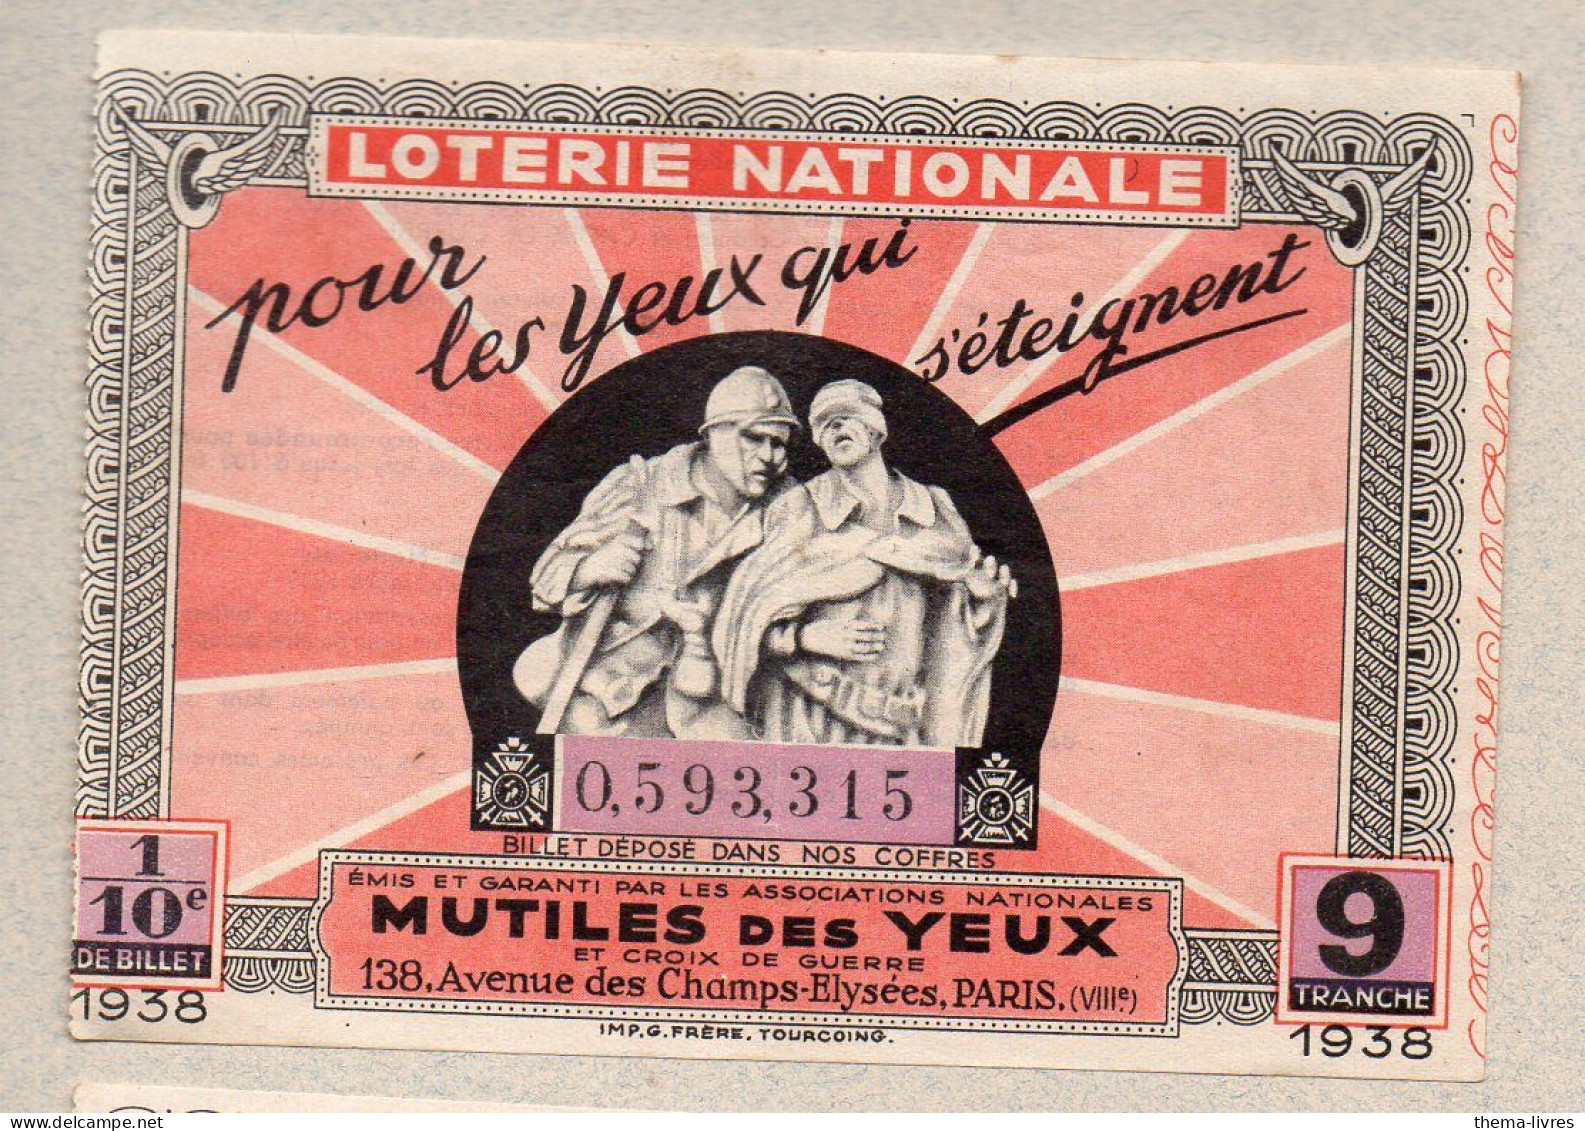 Billet LOTERIE NATIONALE 1938 MUTILES DES YEUX    (PPP46914 / D) - Lottery Tickets